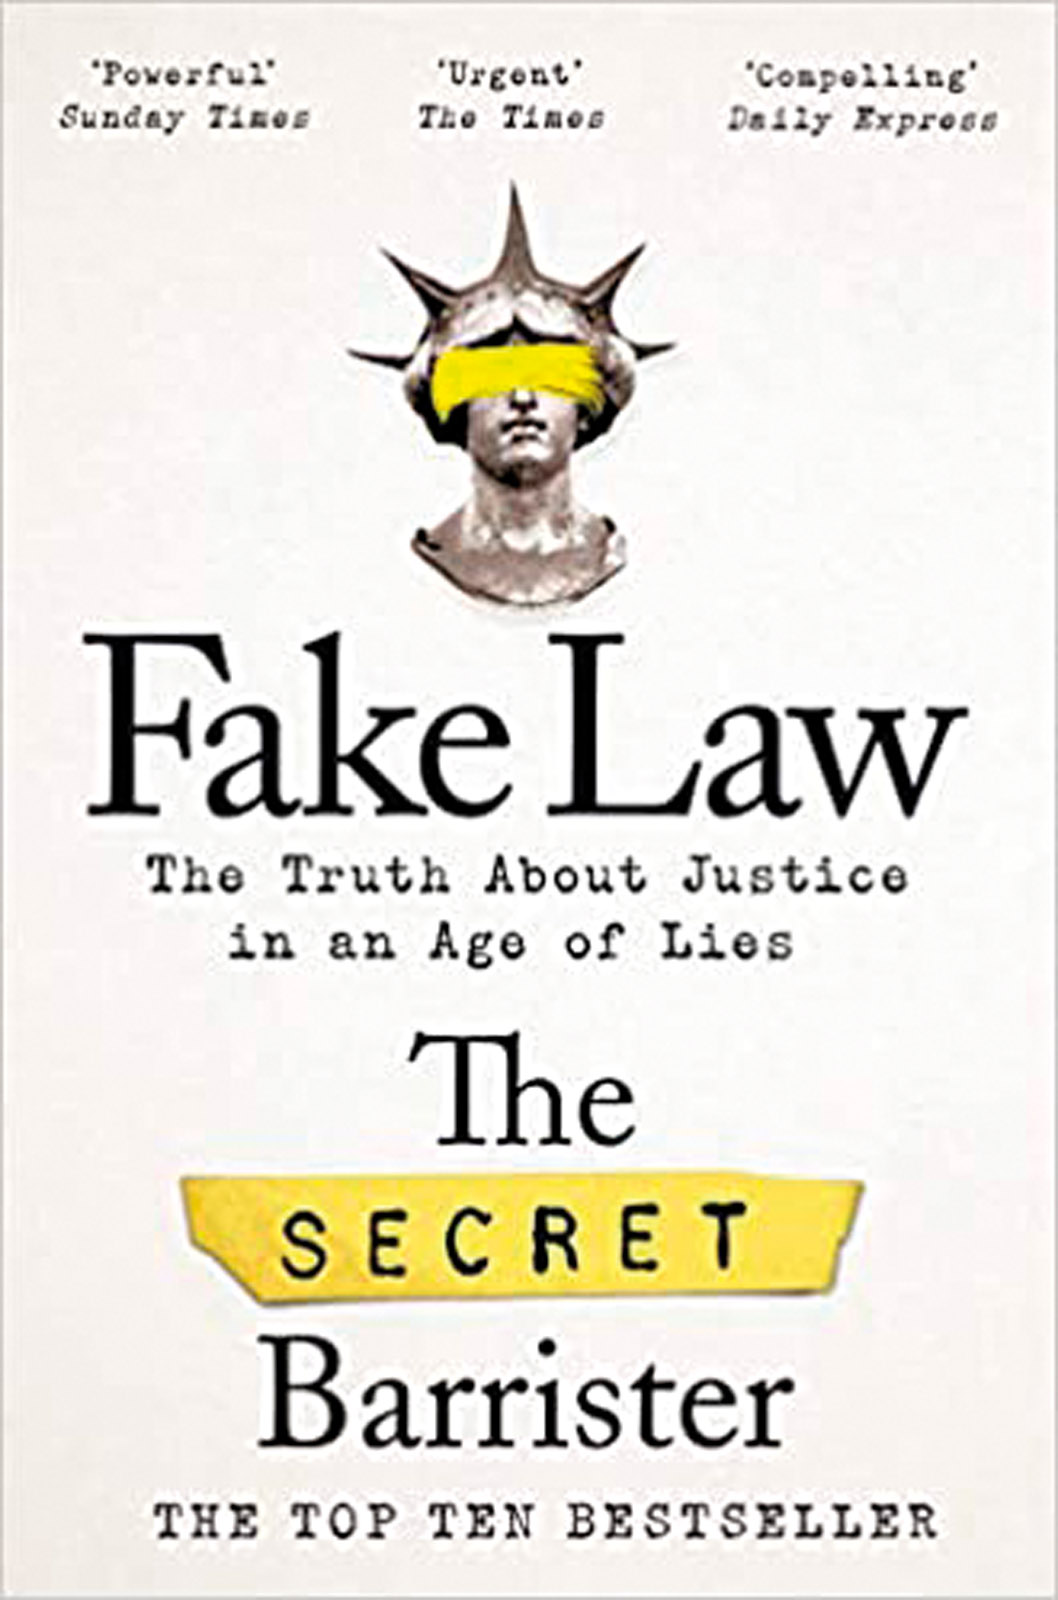 Cover, Fake Law by The Secret Barrister